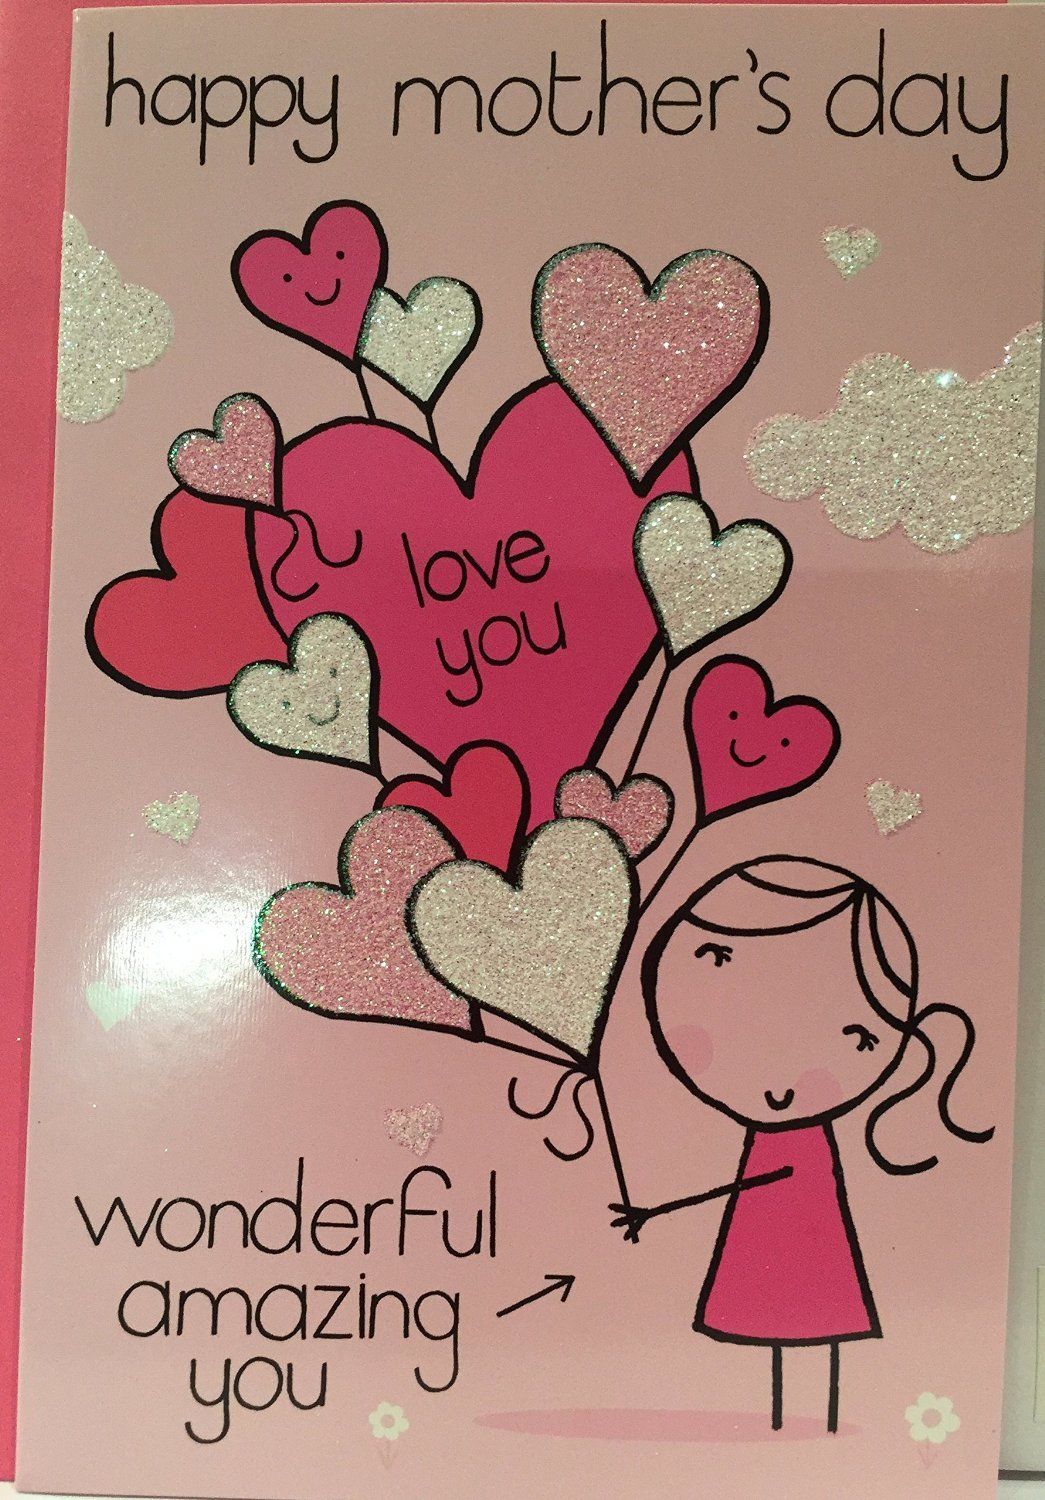 Wonderful Amazing You Happy Mother's Day Greeting Card